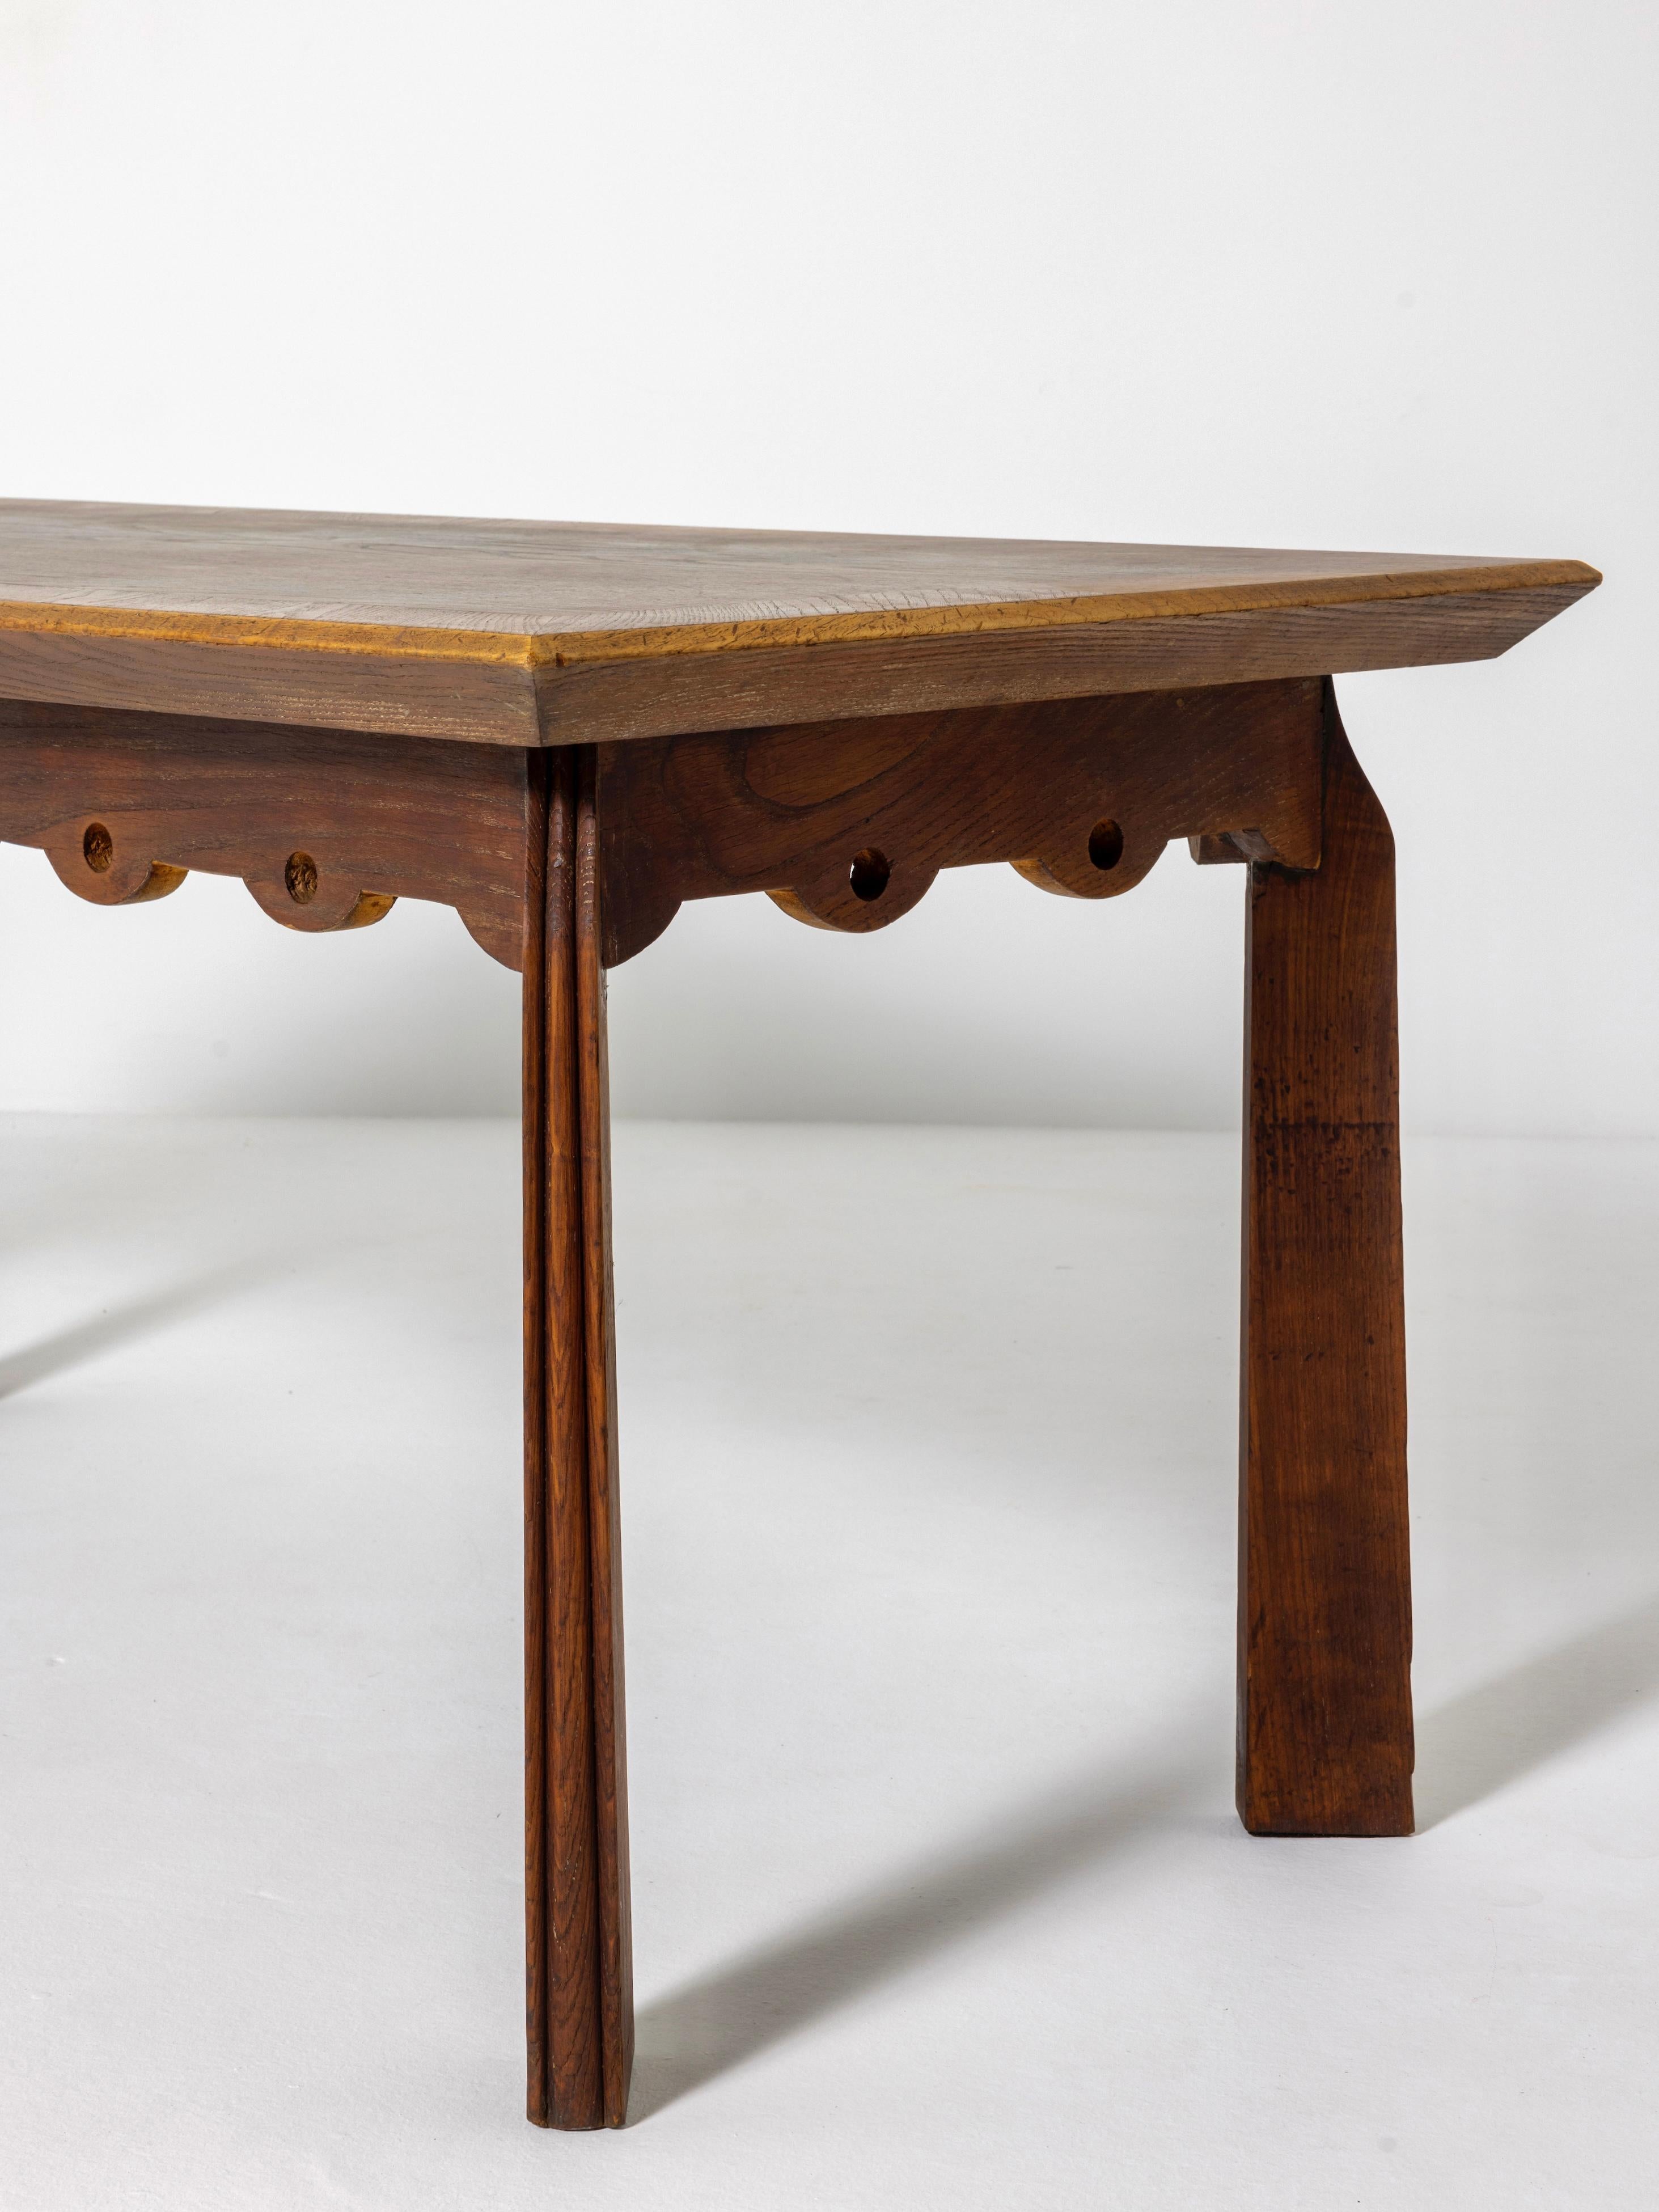 20th Century Italian Modern Dining Table by Paolo Buffa, circa 1940 For Sale